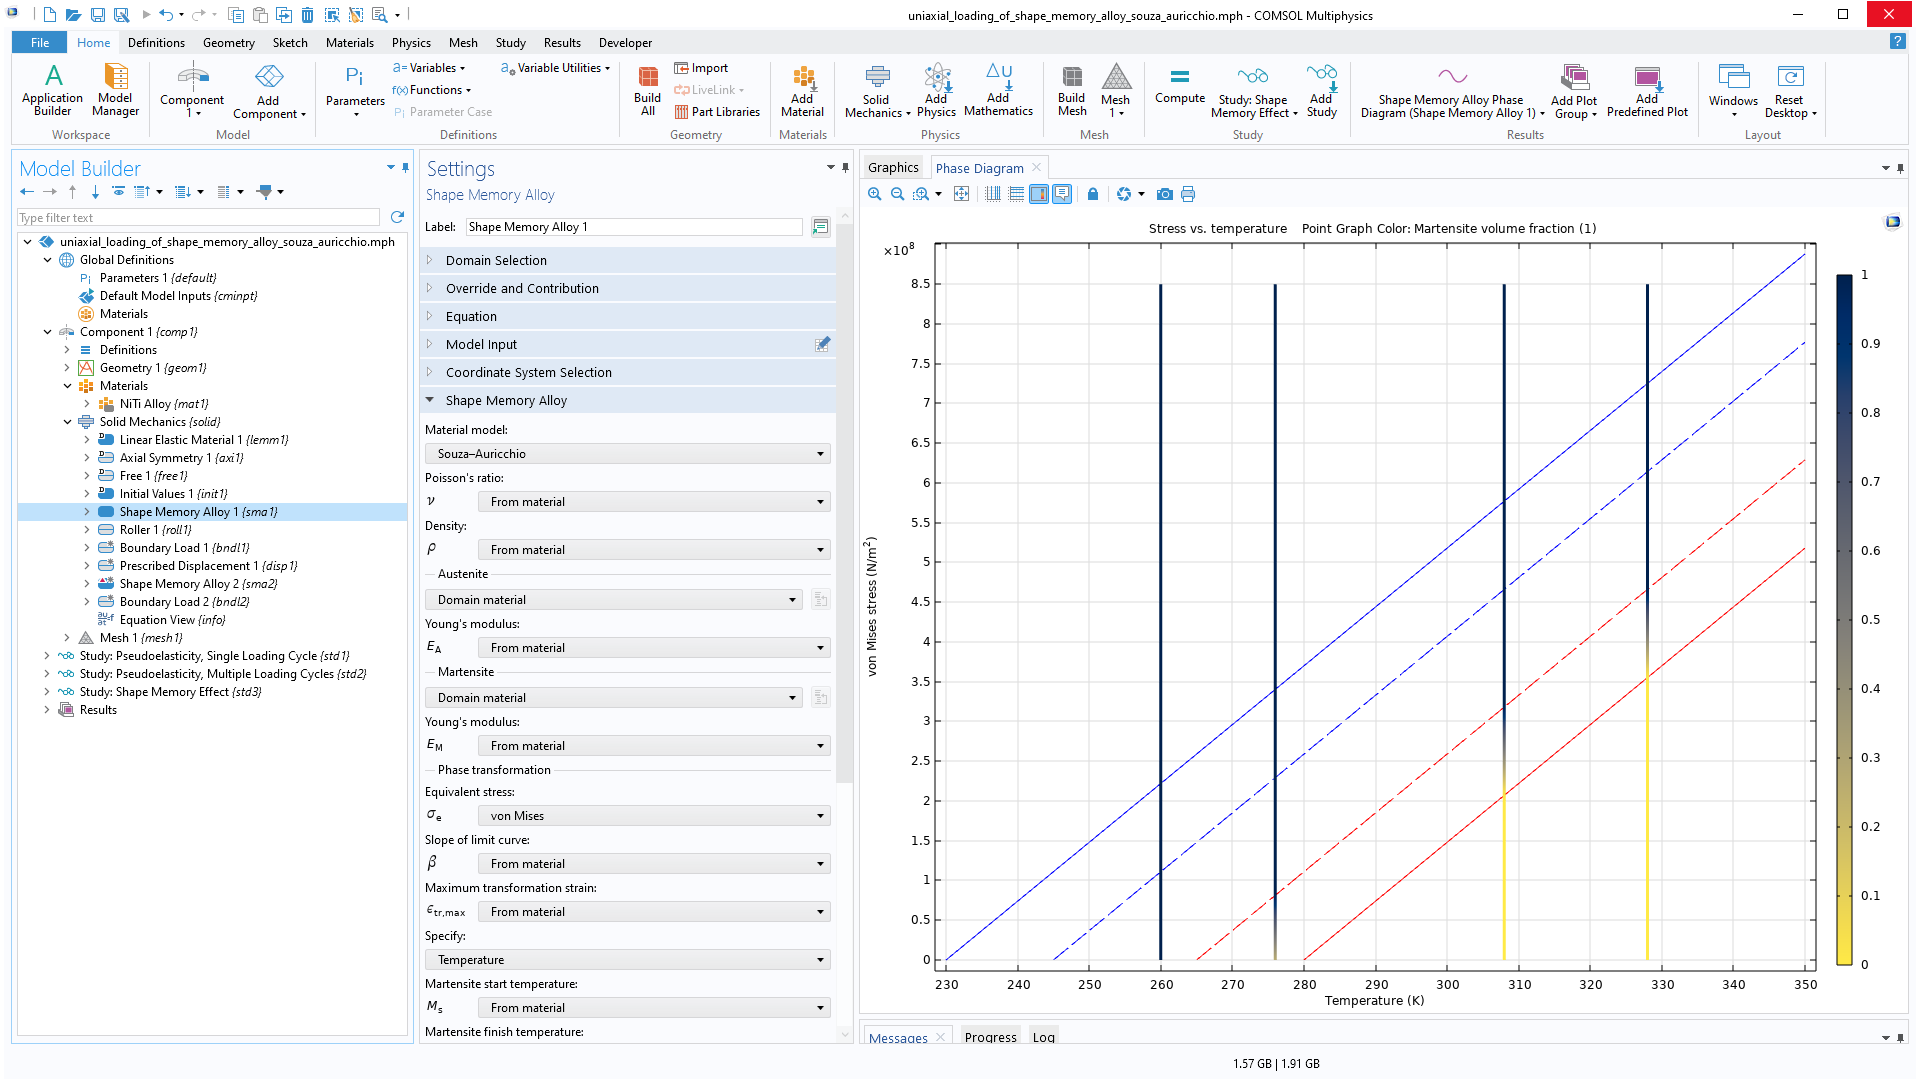 The COMSOL Multiphysics UI showing the Model Builder with the Shape Memory Alloy node highlighted, the corresponding Settings window, and a 1D plot in the Graphics window.